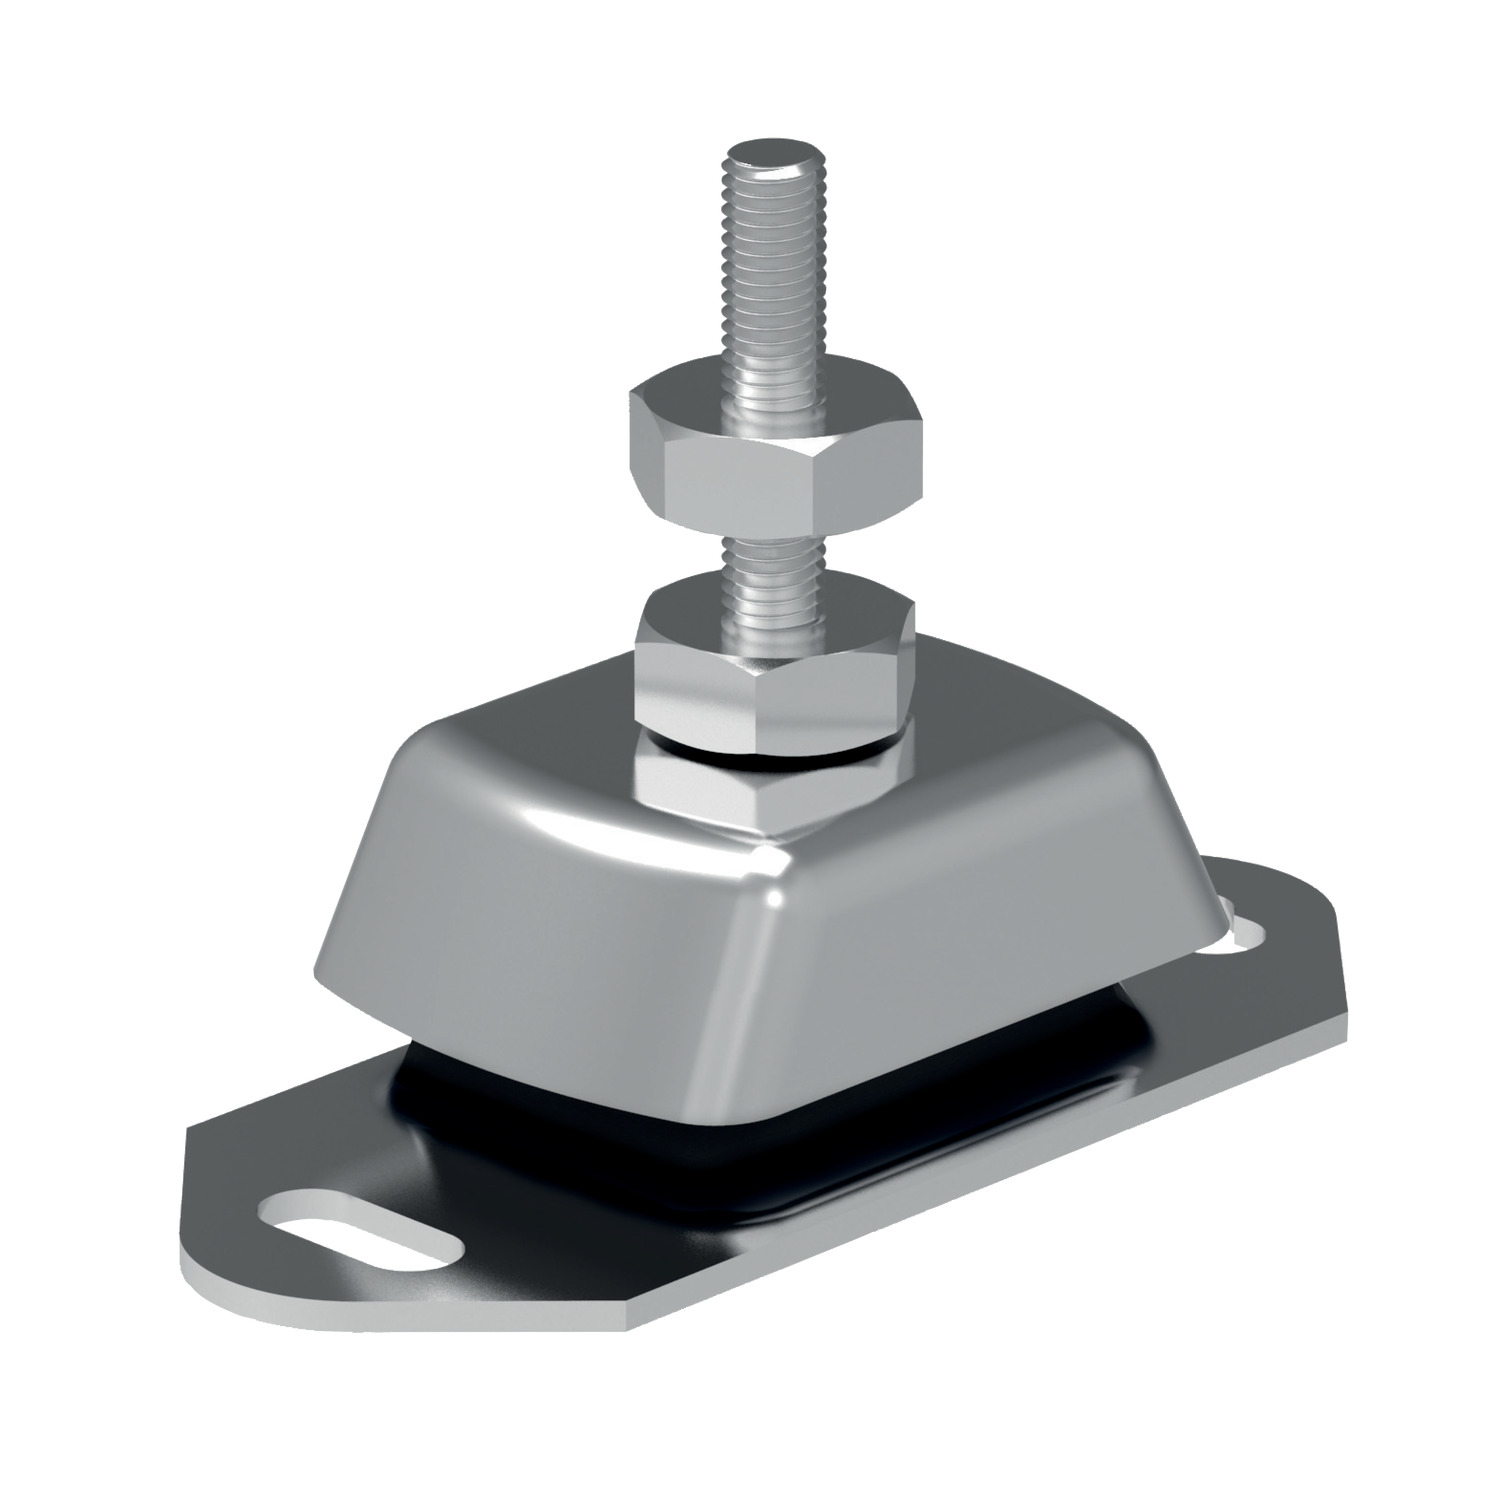 Product 61292, Anti-vibration Fail-Safe Mounts A2 stainless / 